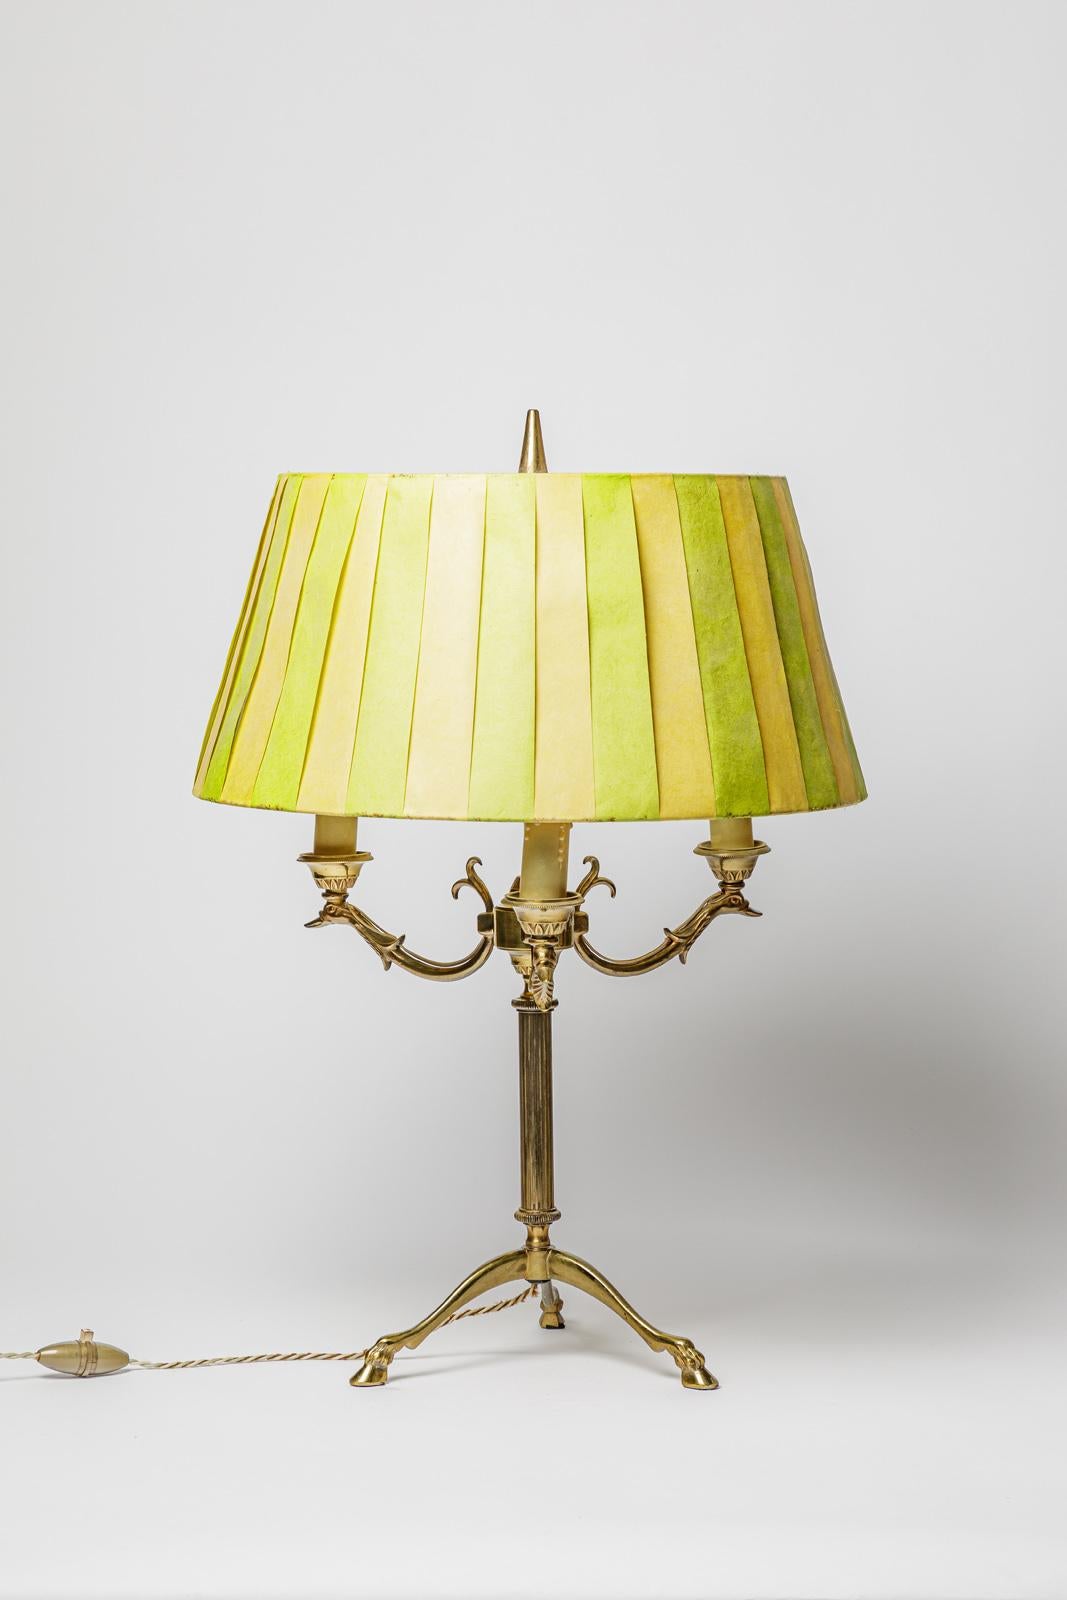 Attributed to Maison Jansen

Large golden brass 20th century table lamp

Original good condition

Original lampshade

Electrical system is ok

Total height 58 cm
Total large 37 cm

